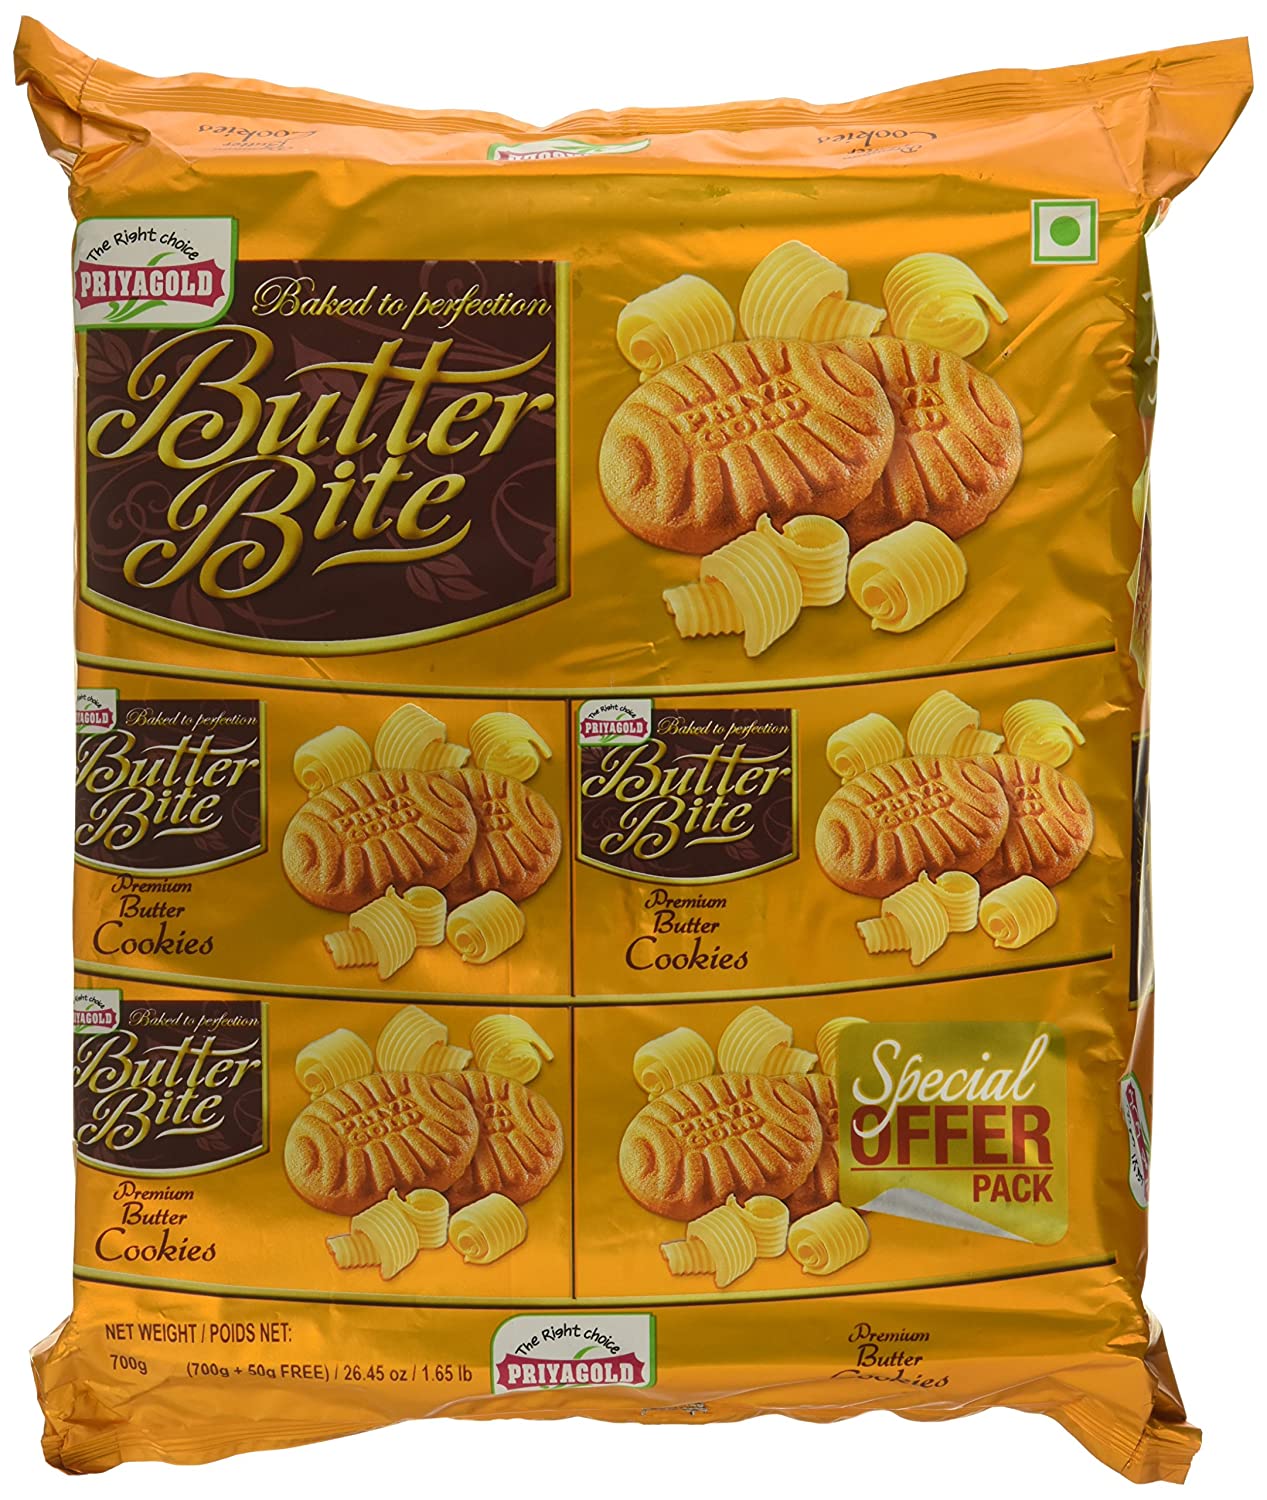 Priyagold Butter Bite Biscuits - 750 gm